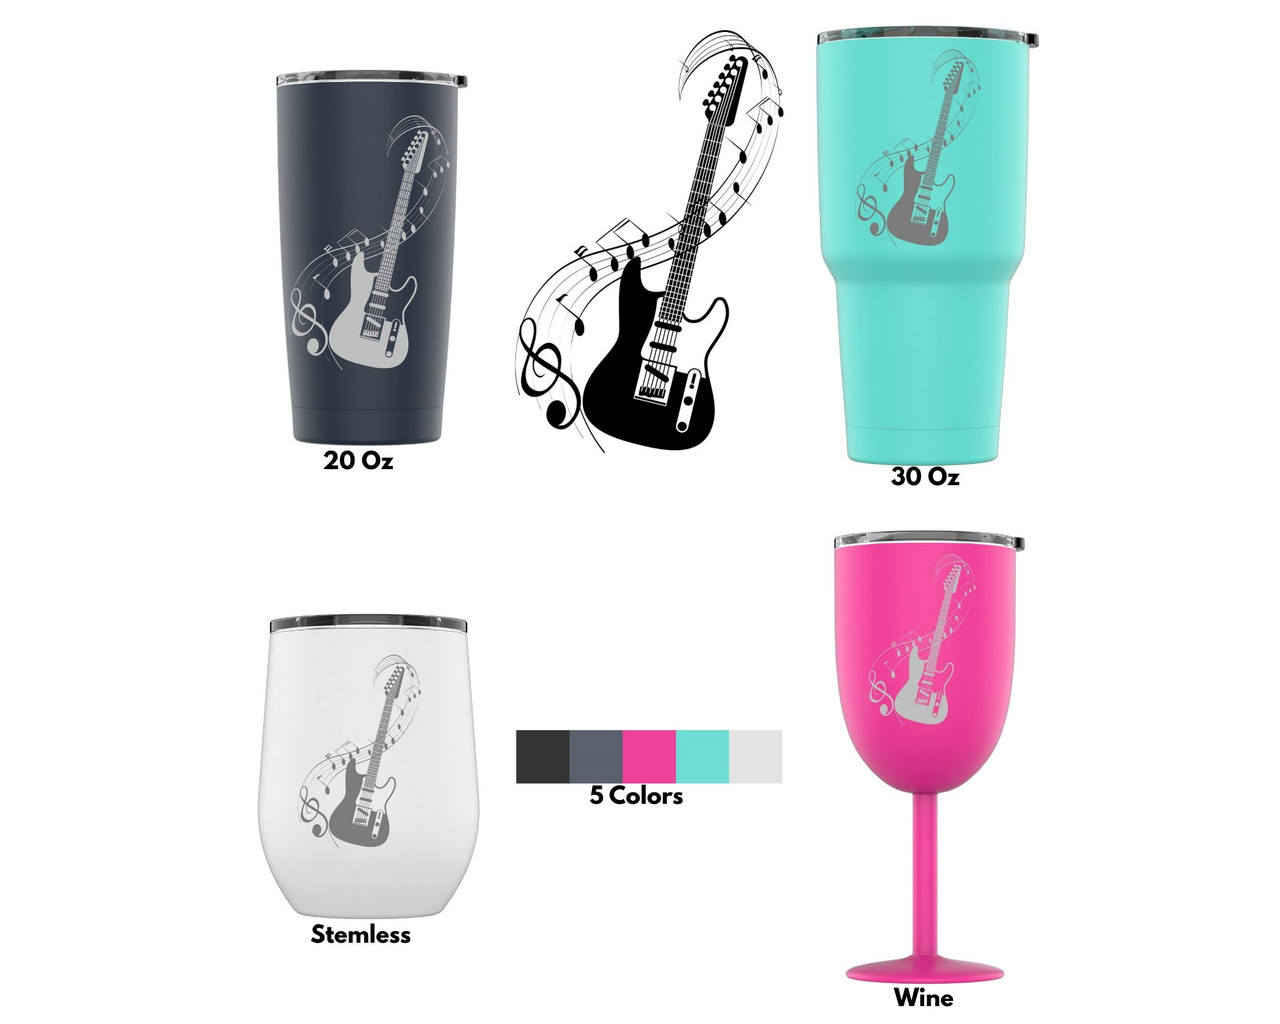 Laser Engraved Electric Guitar With Musical Notes Stainless Steel Powder  Coated Tumbler + Splash Proof Lid + 2 Straws*, Triple Wall Vacuum  Insulated, Coffee Cup Travel Mug